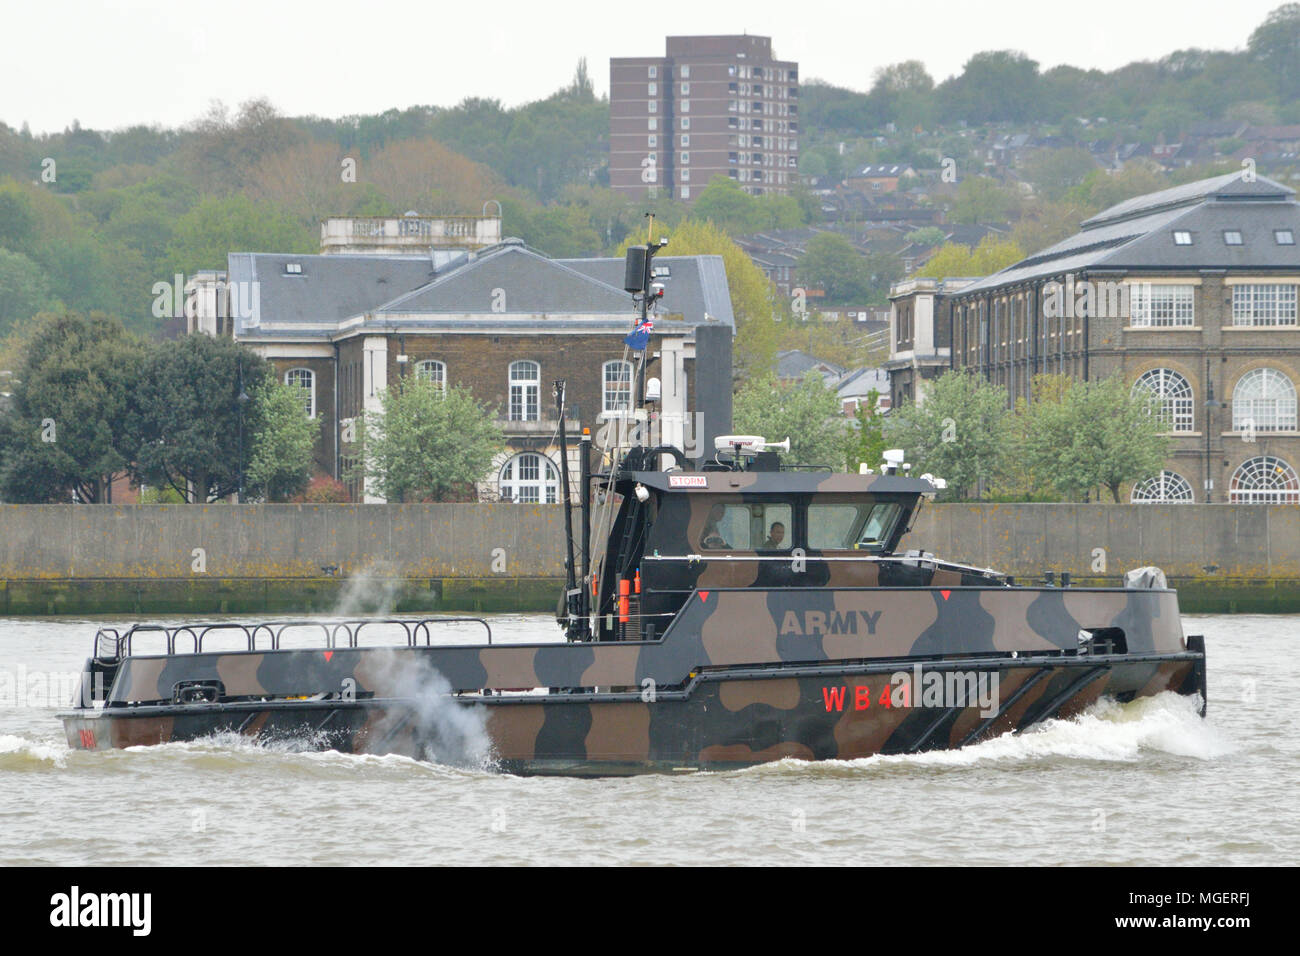 British Army workboat on River Thames in London Stock Photo